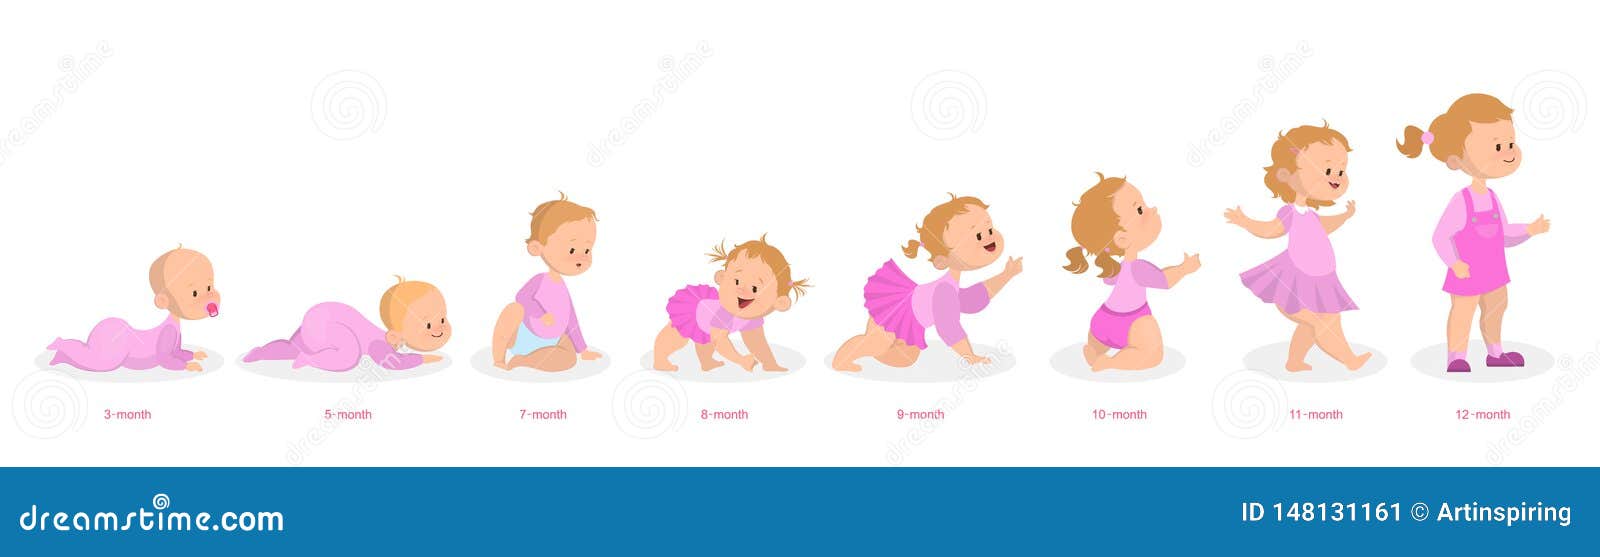 Child Growth Stages